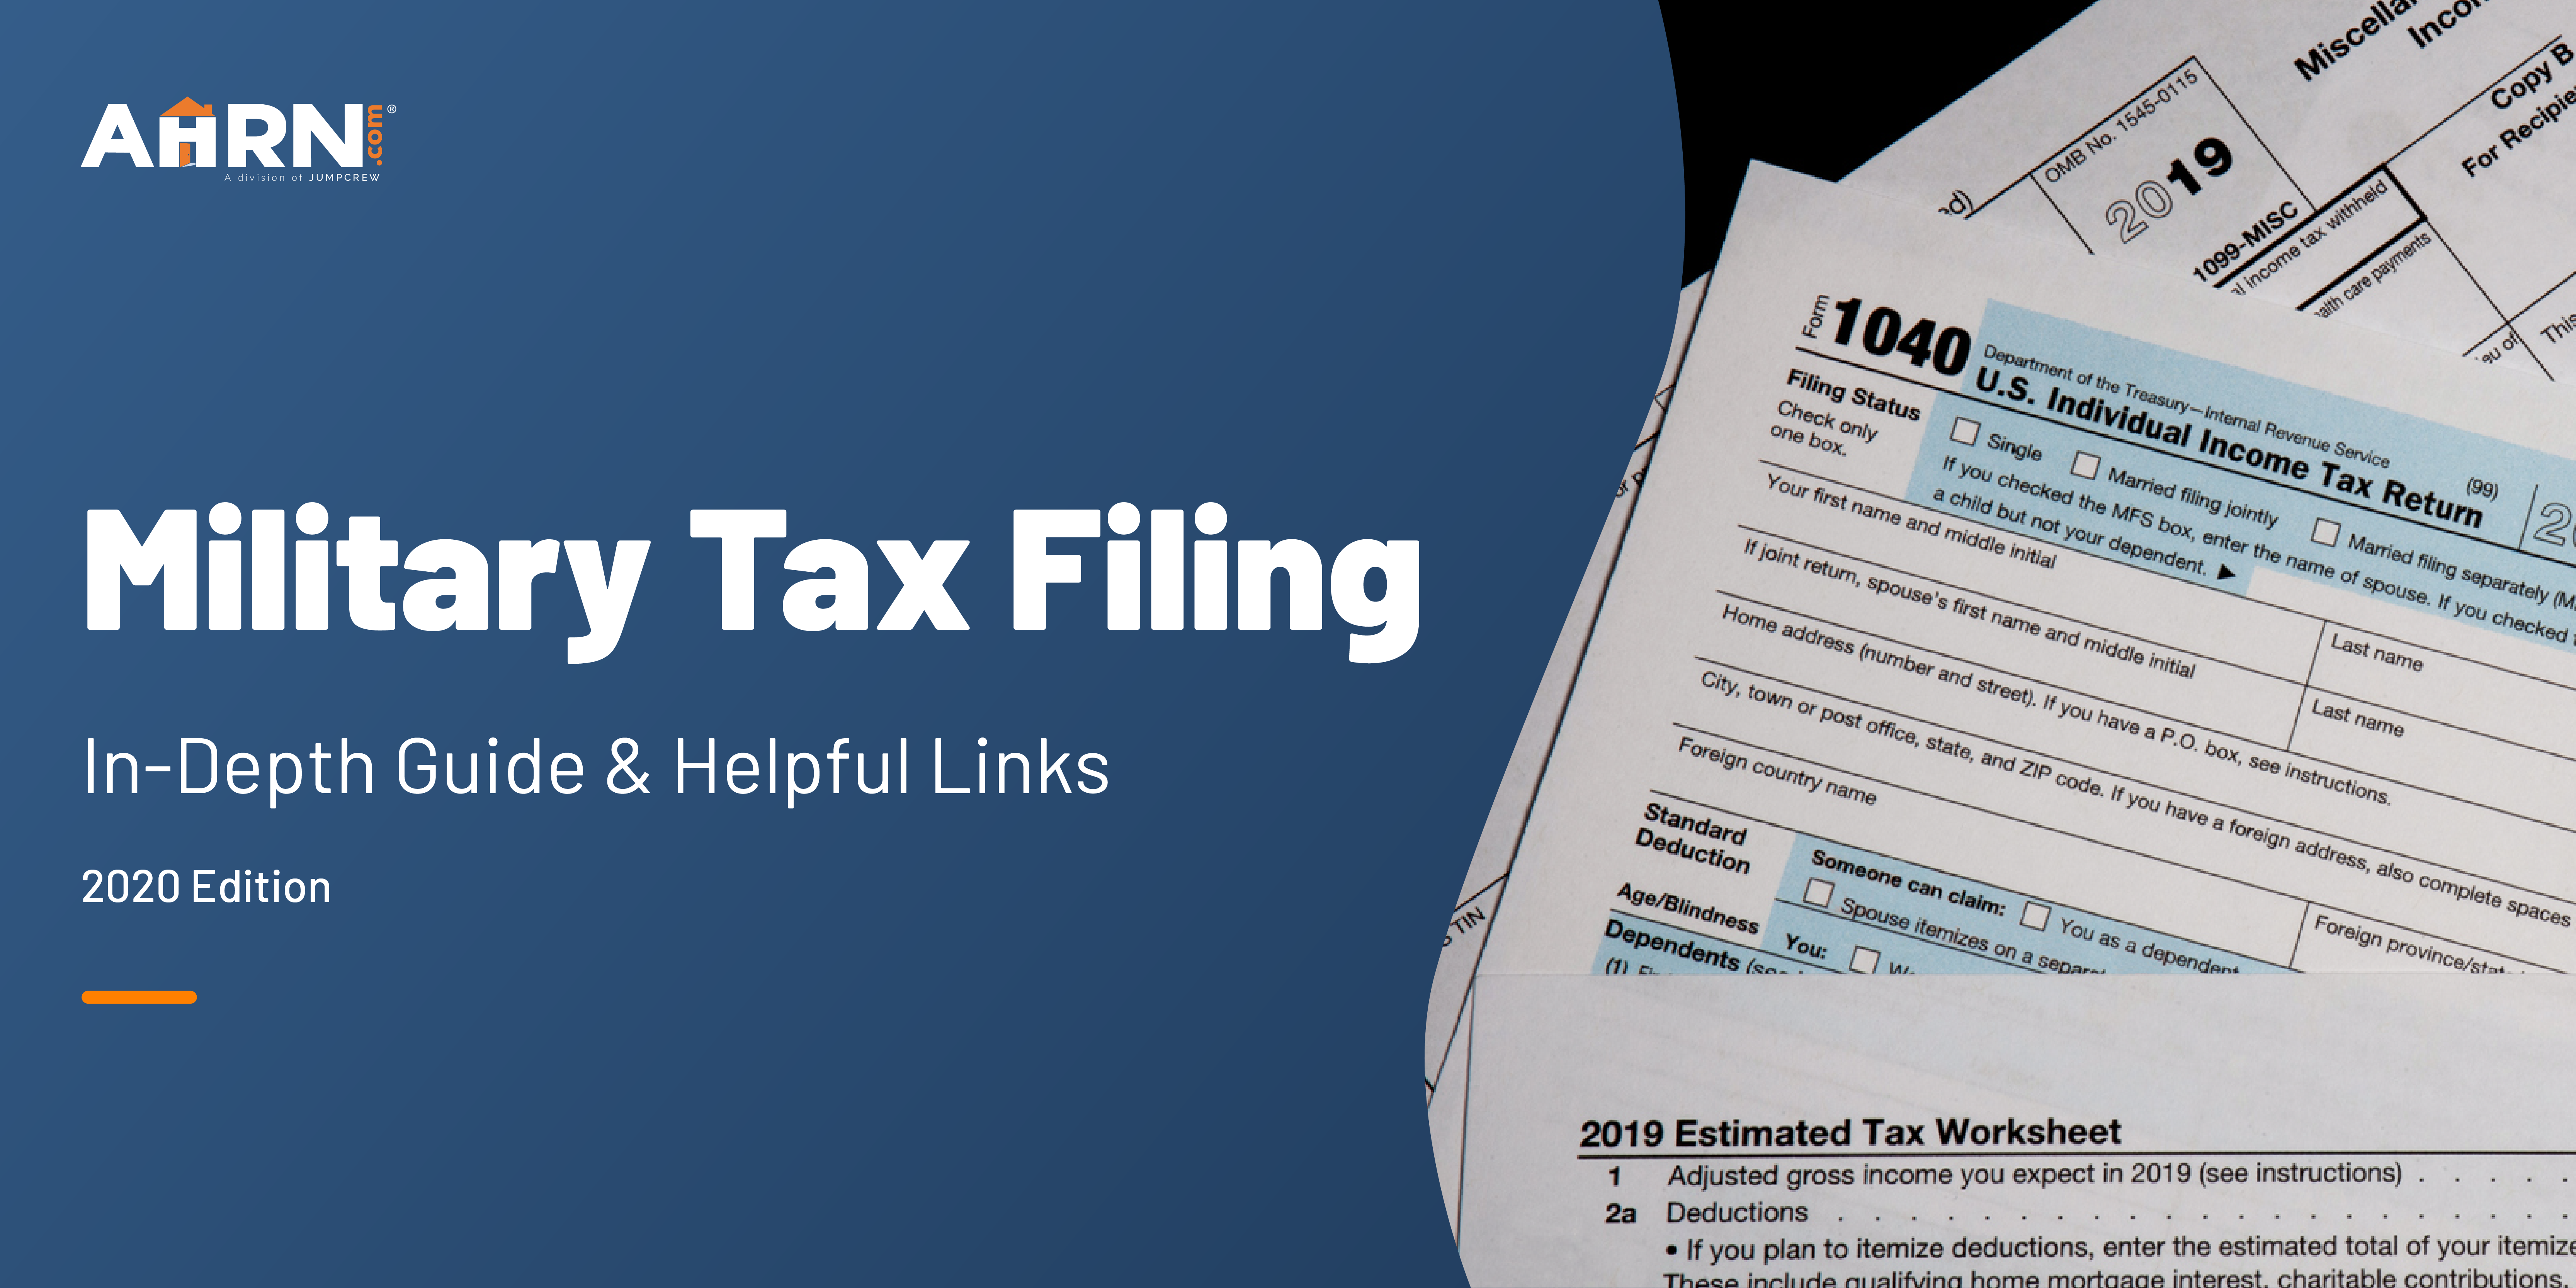 Military Taxes In Depth Guide Helpful Links To File 2020 Edition